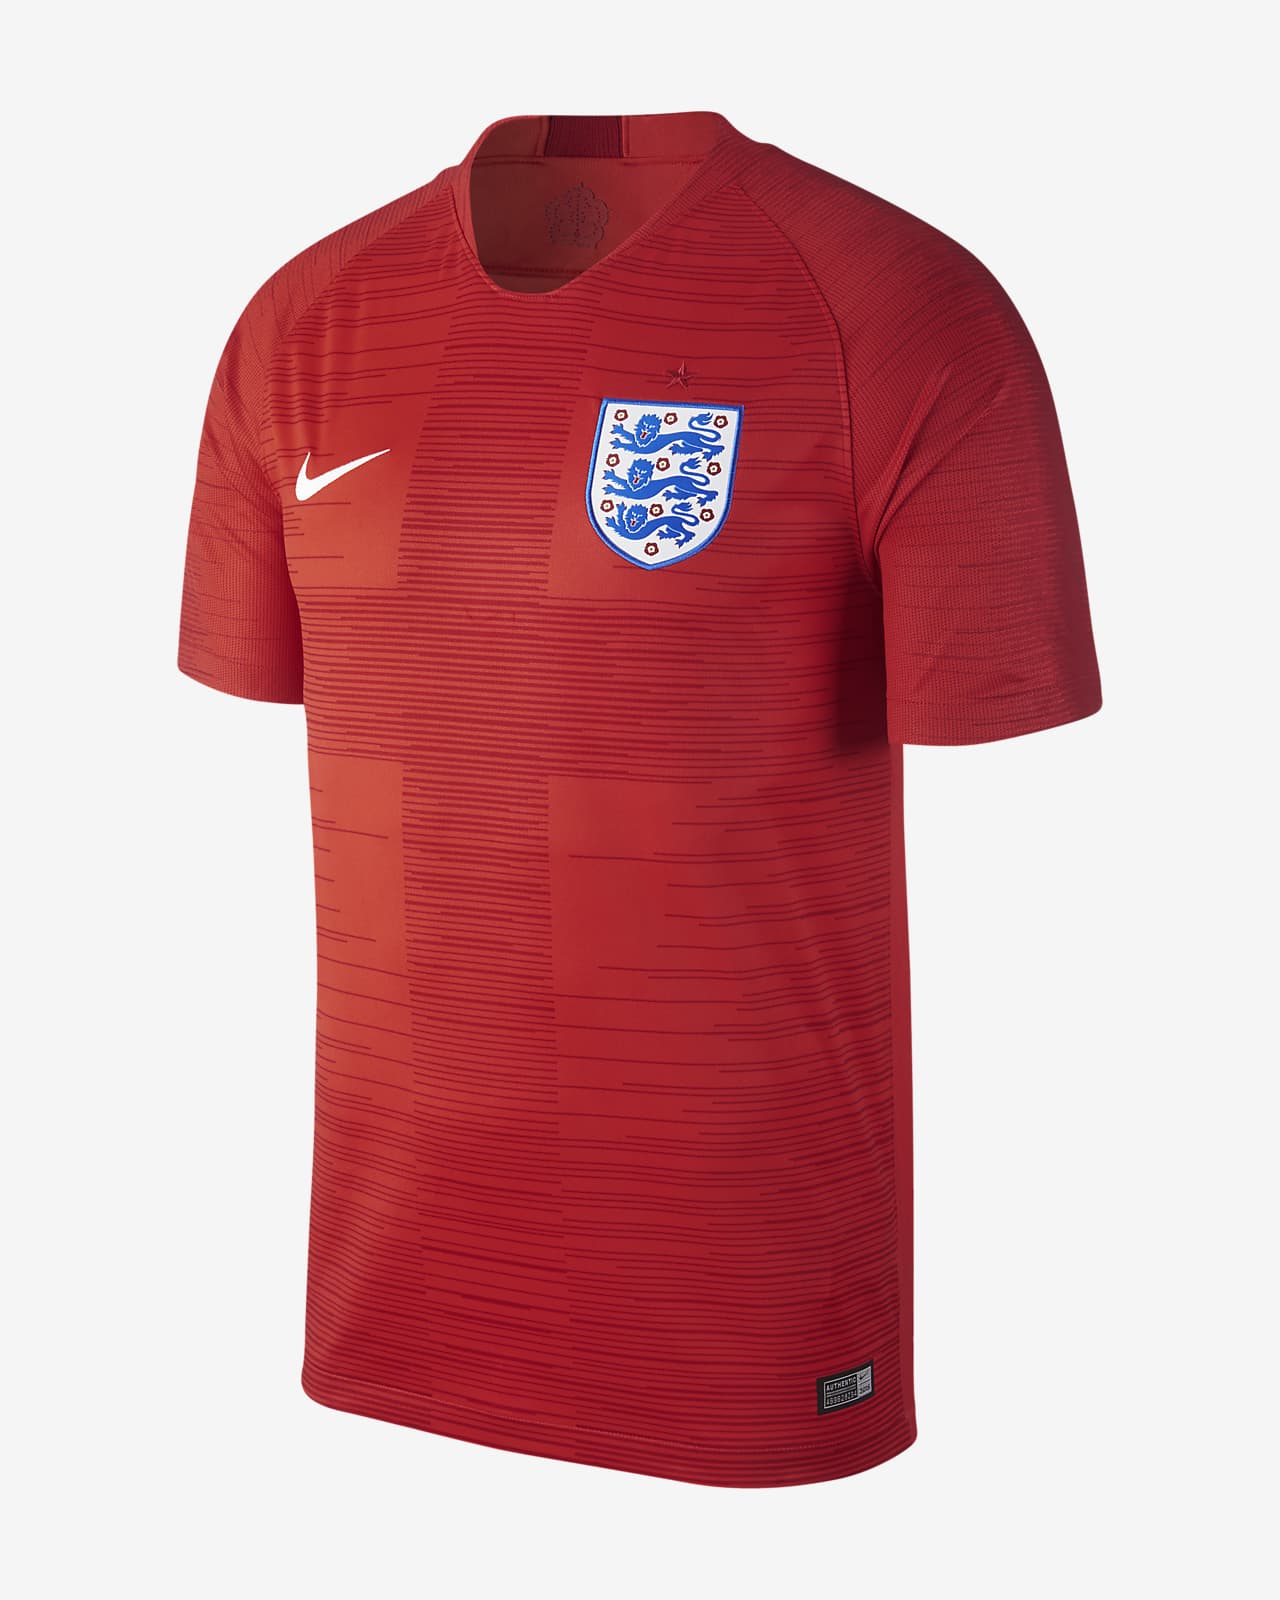 England Football Shirt Store, 34% - philippineconsulate.rs